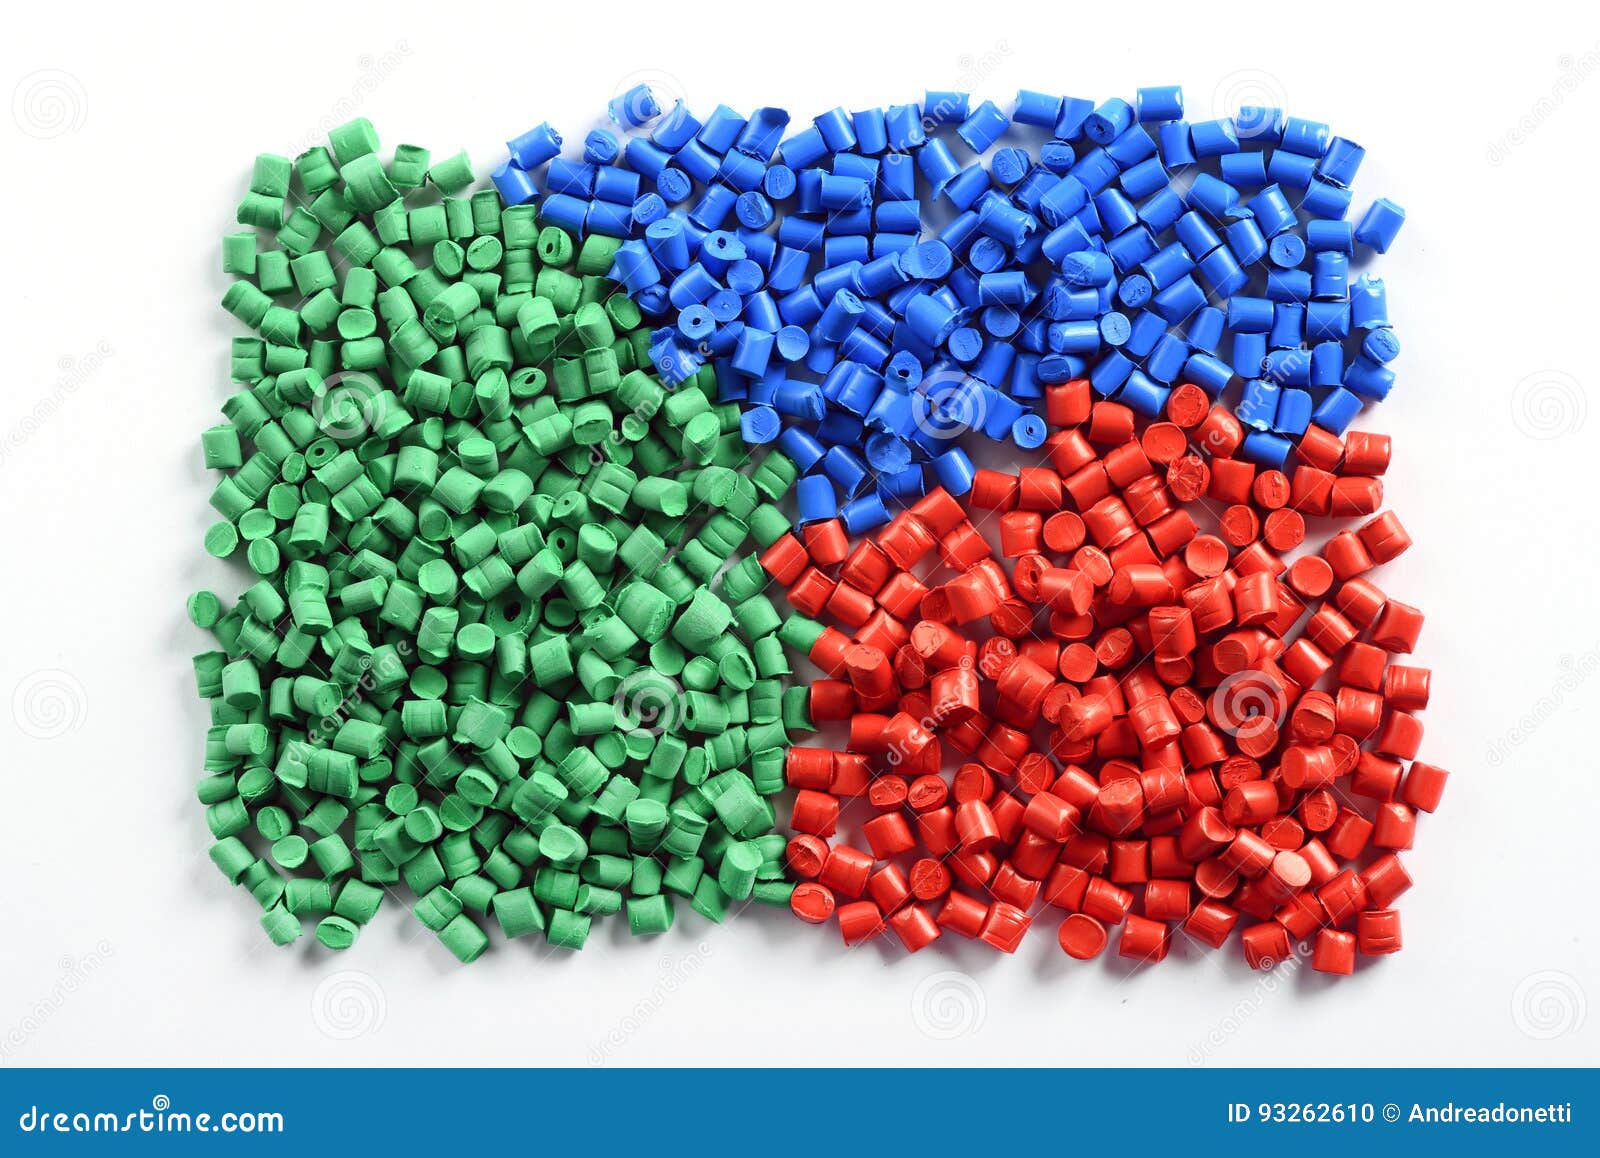 colorful collection of molded plastic pellets